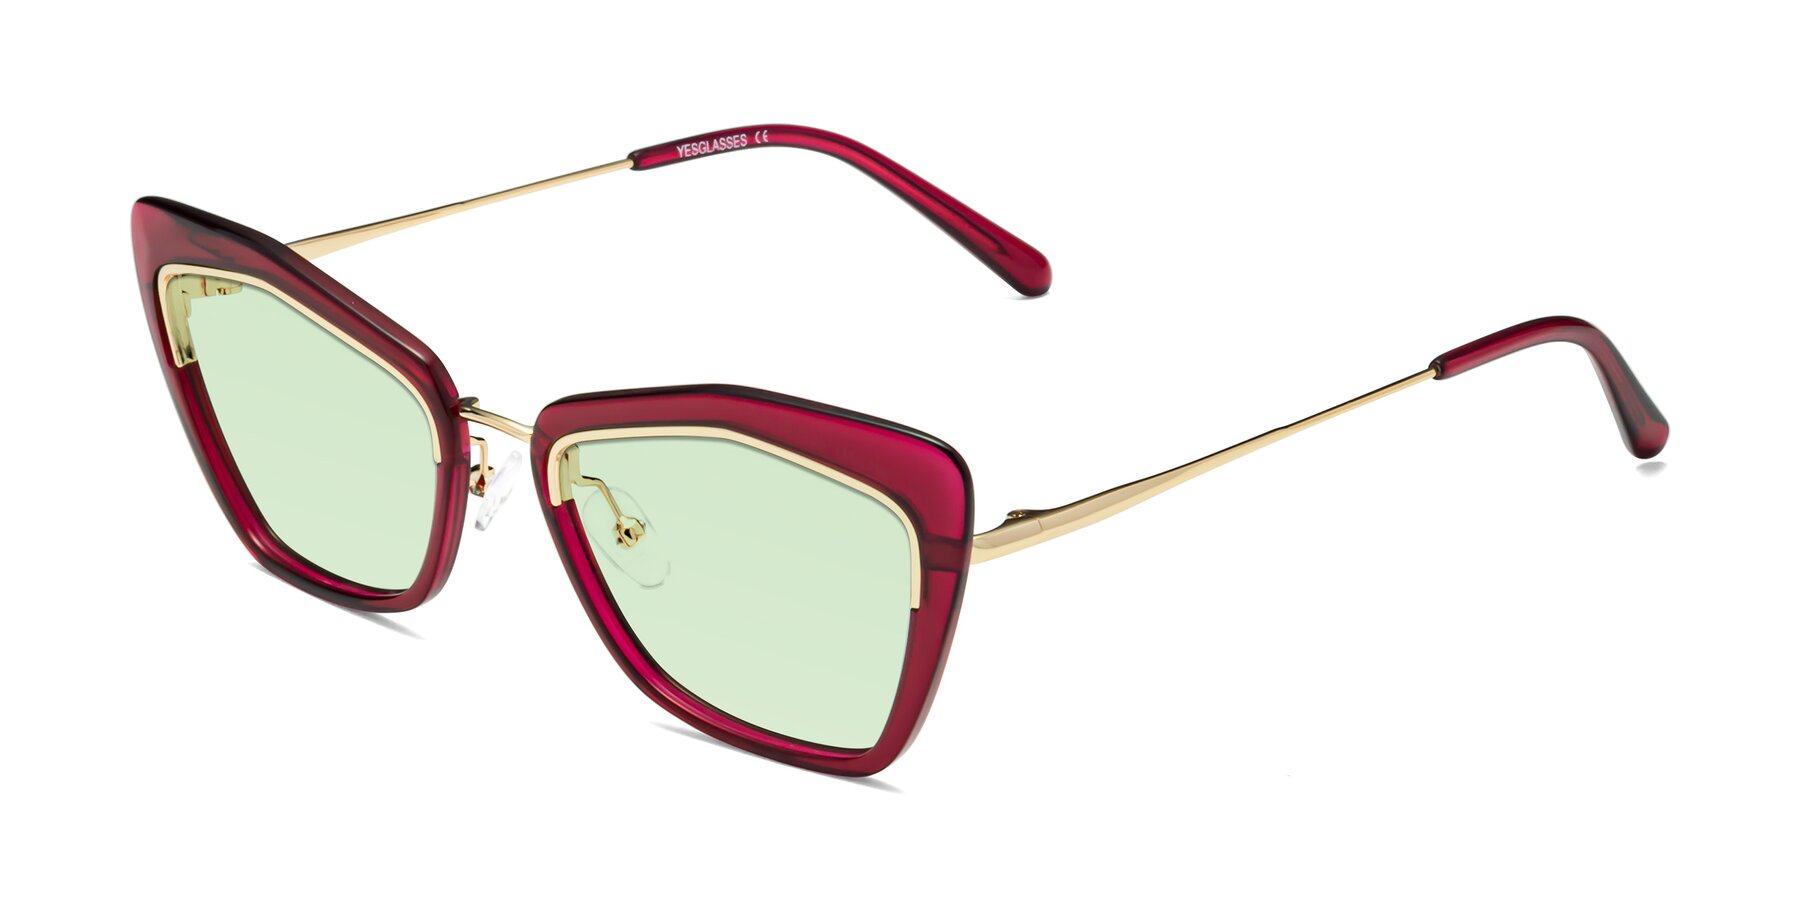 Angle of Lasso in Wine with Light Green Tinted Lenses